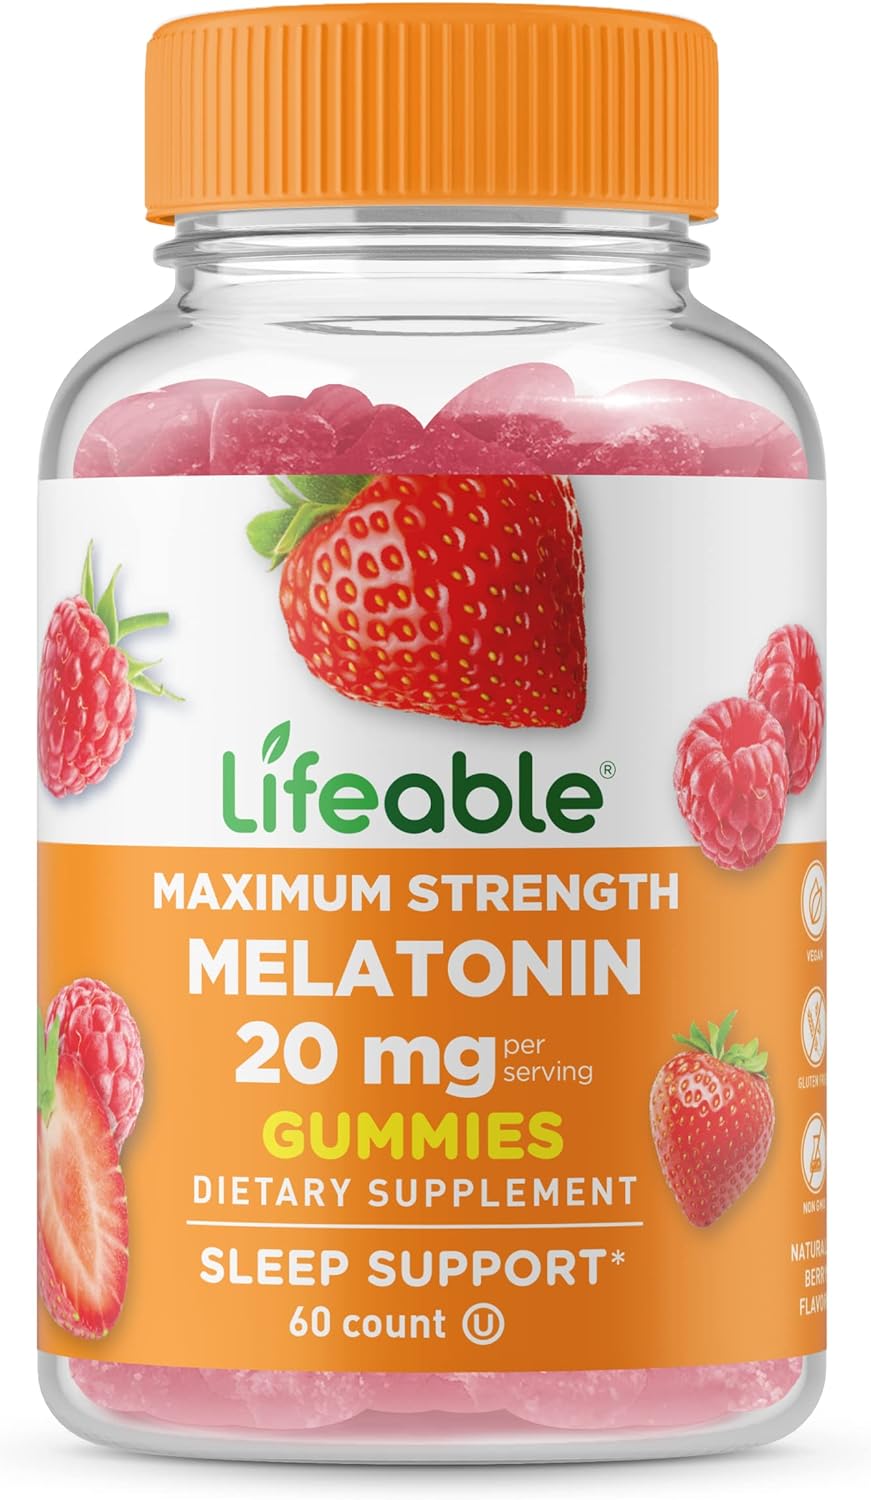 Lifeable Melatonin 20mg - Great Tasting Natural Flavor Gummy Supplement - Gluten Free Vegetarian GMO-Free Chewable - for Help Falling Asleep and Staying Sleep - for Adults, Man, Women - 60 Gummies